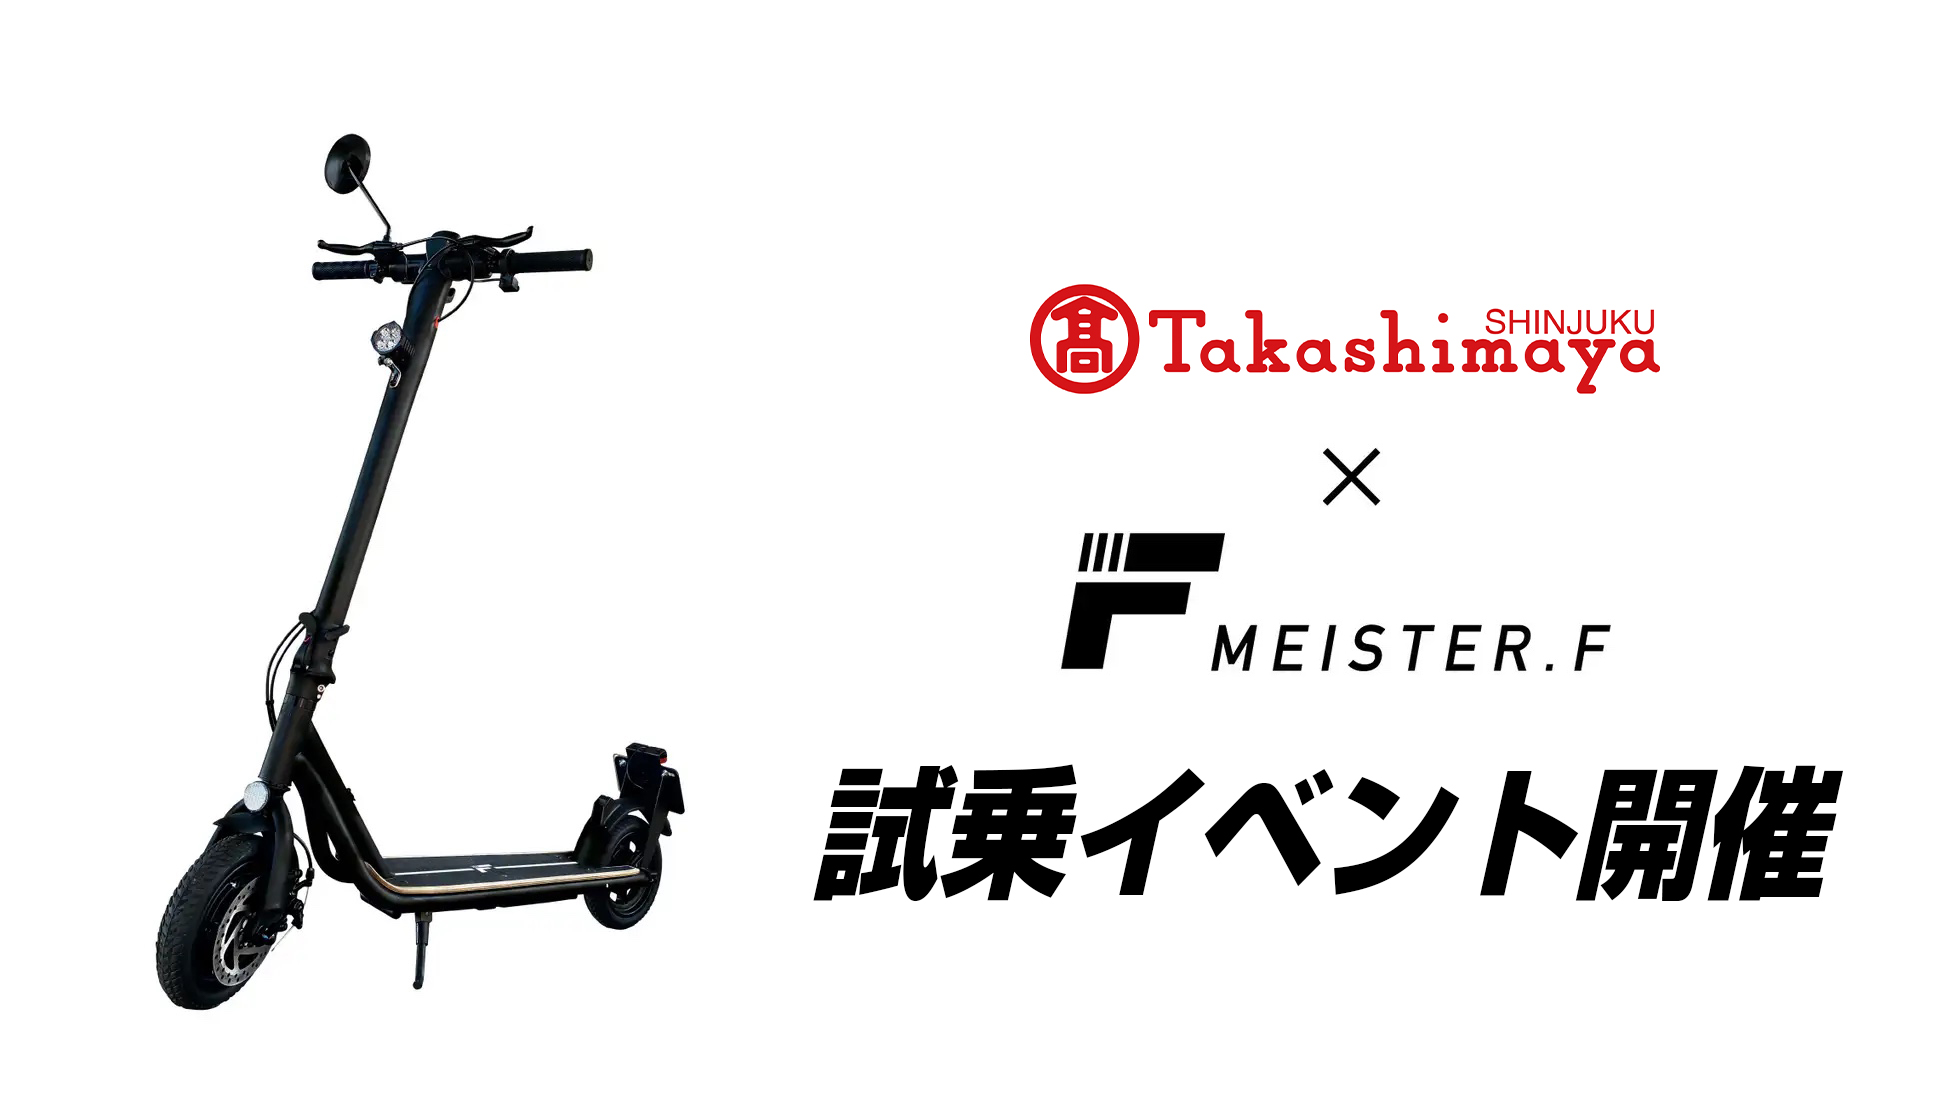 【MEISTER.F】電動キックボード試乗イベント 新宿髙島屋で7月の3